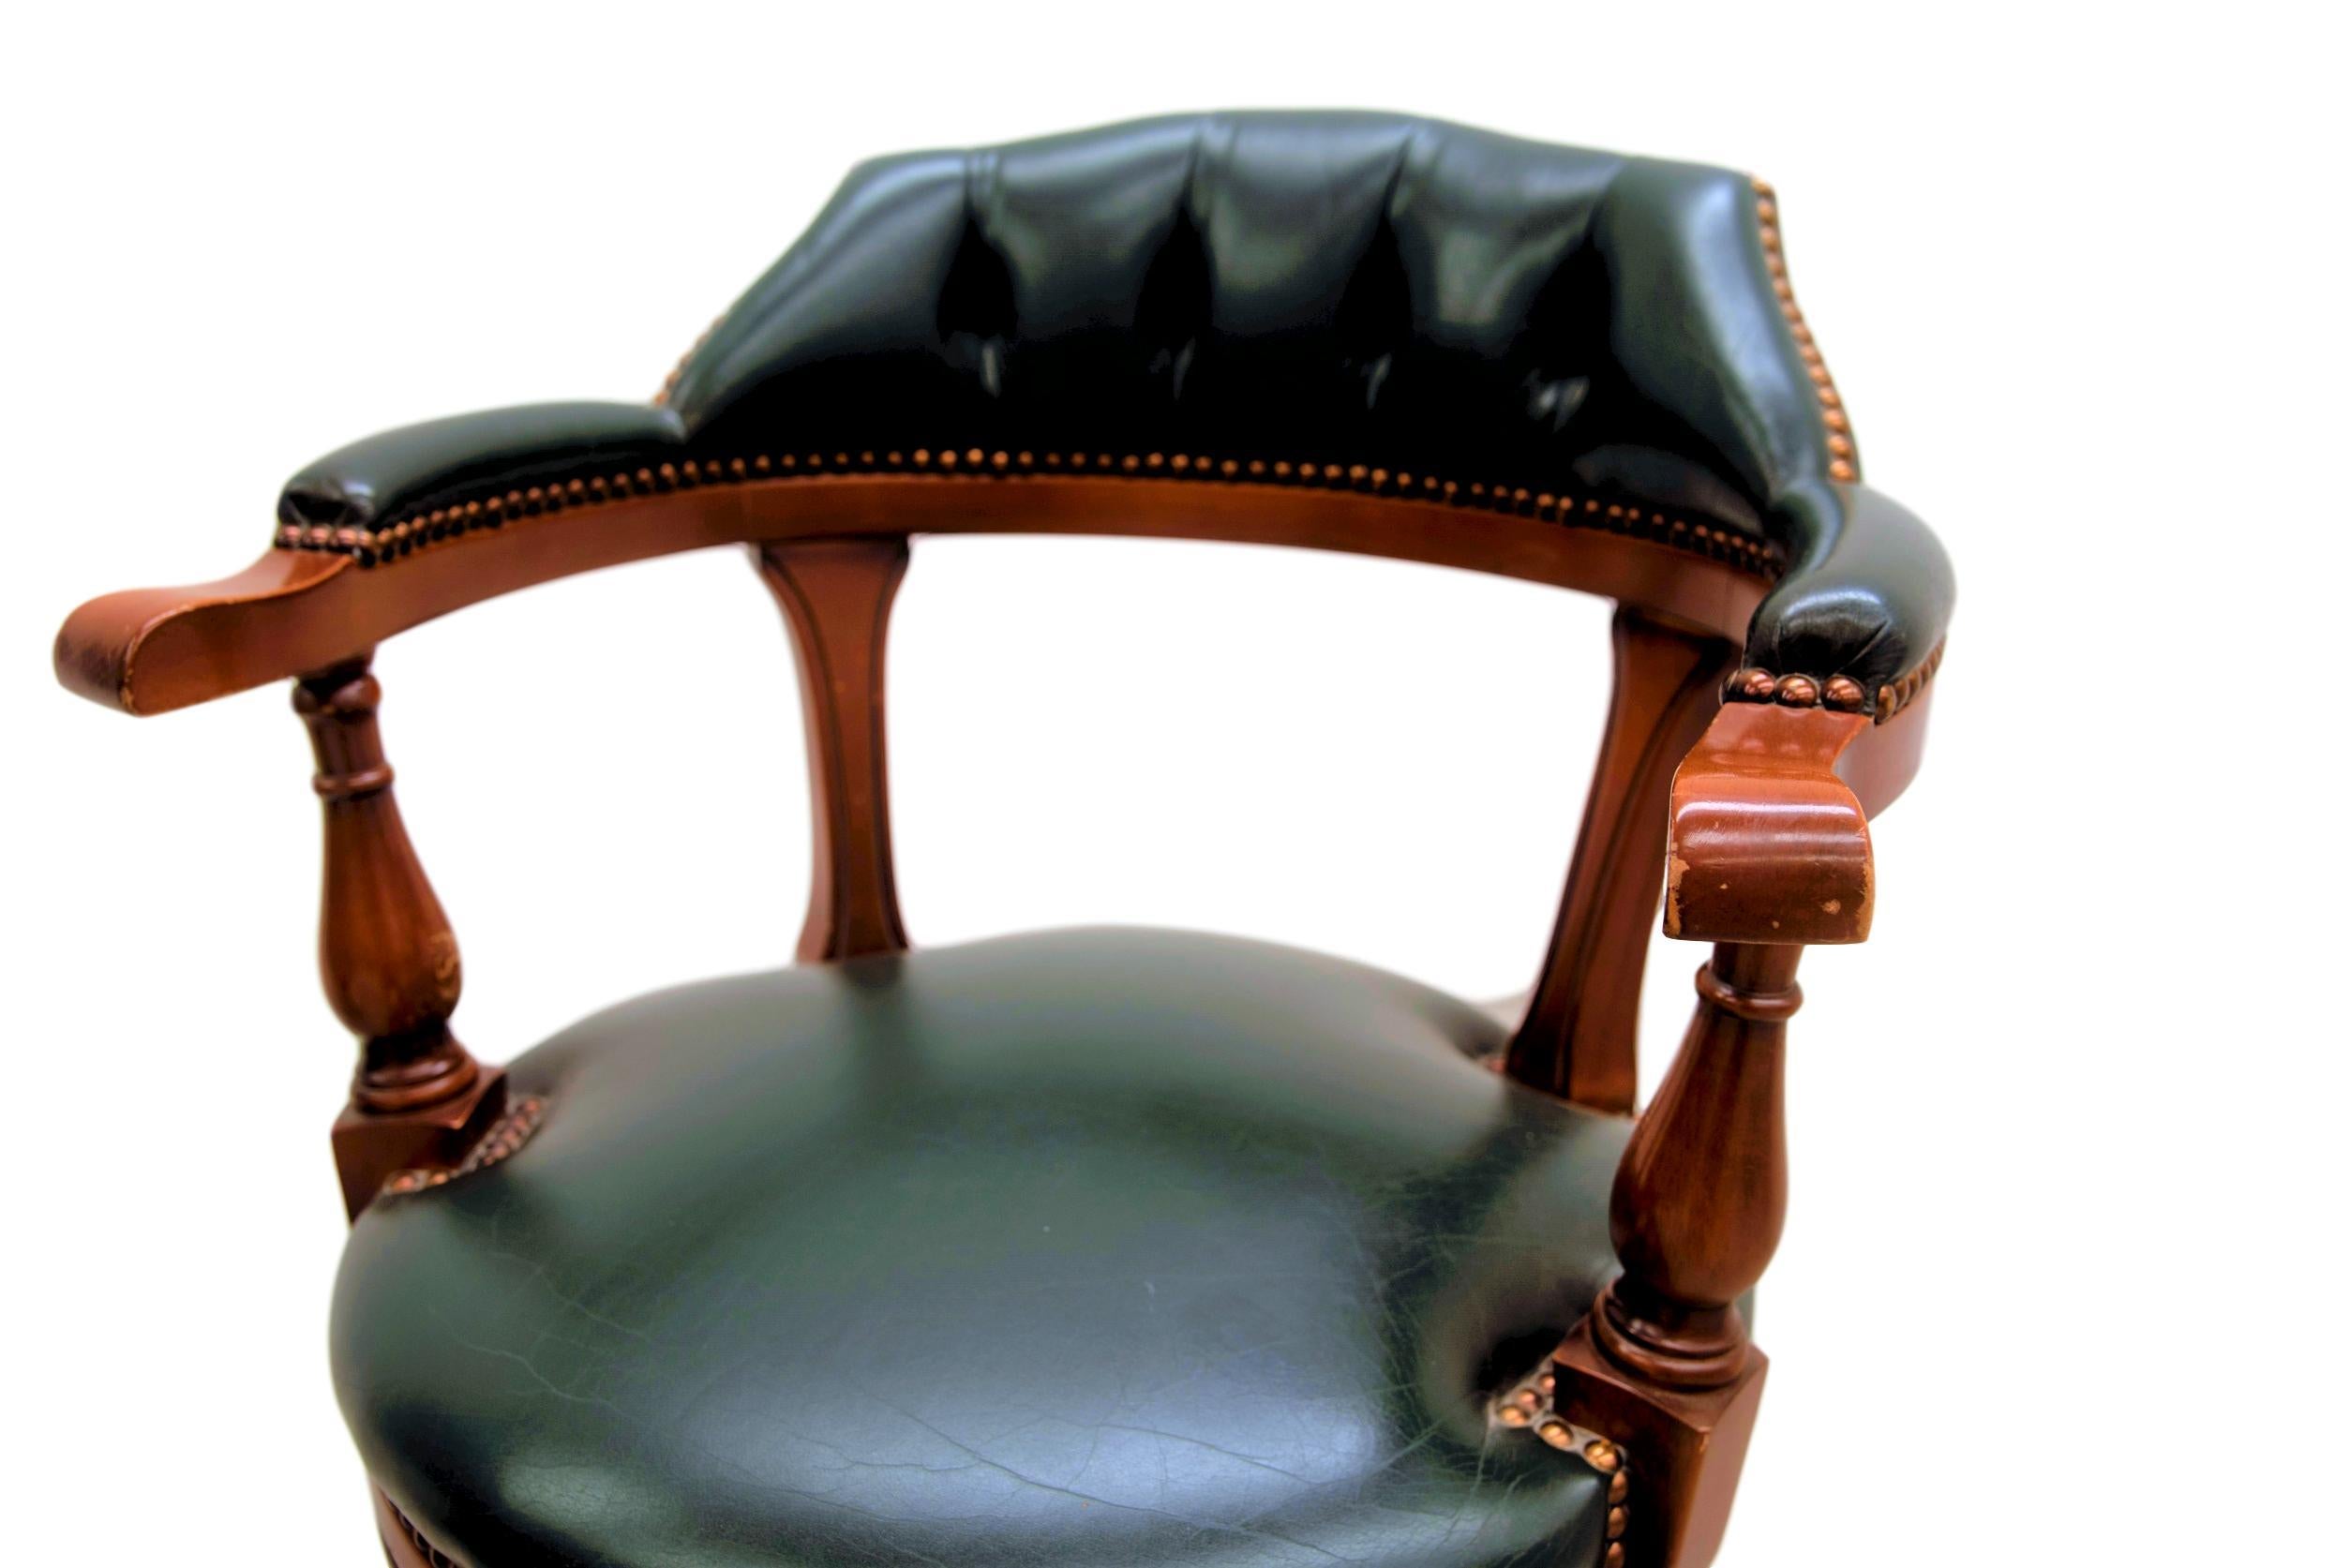 Absolutely stunning pair of 'Captains chair' in a beautiful and elegant green leather and solid wood, with great worn vintage patino to it, handmade with materials of the finest quality.

This pair of typical English Victorian style office or desk